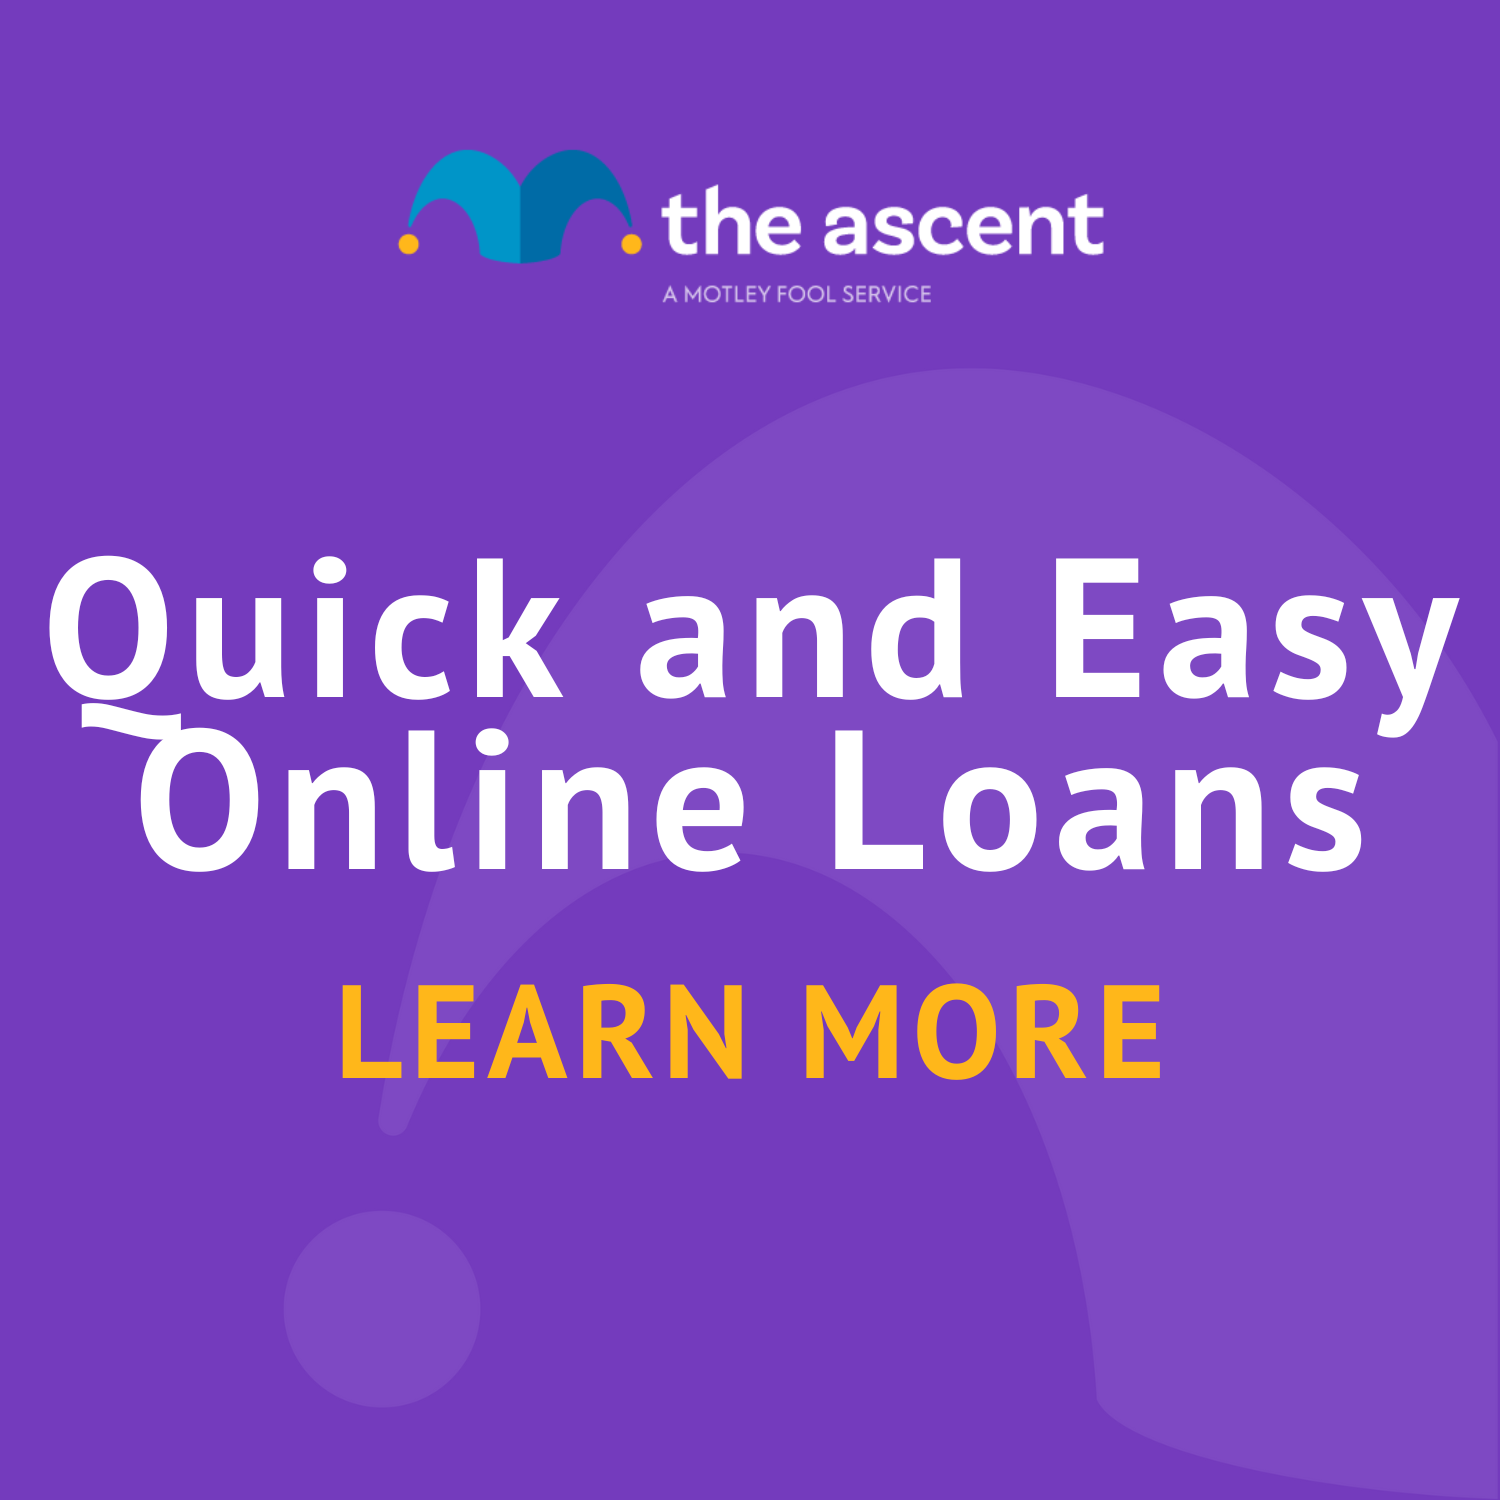 Quick_and_Easy_Online_Loans_3M4MPg5_3ftt